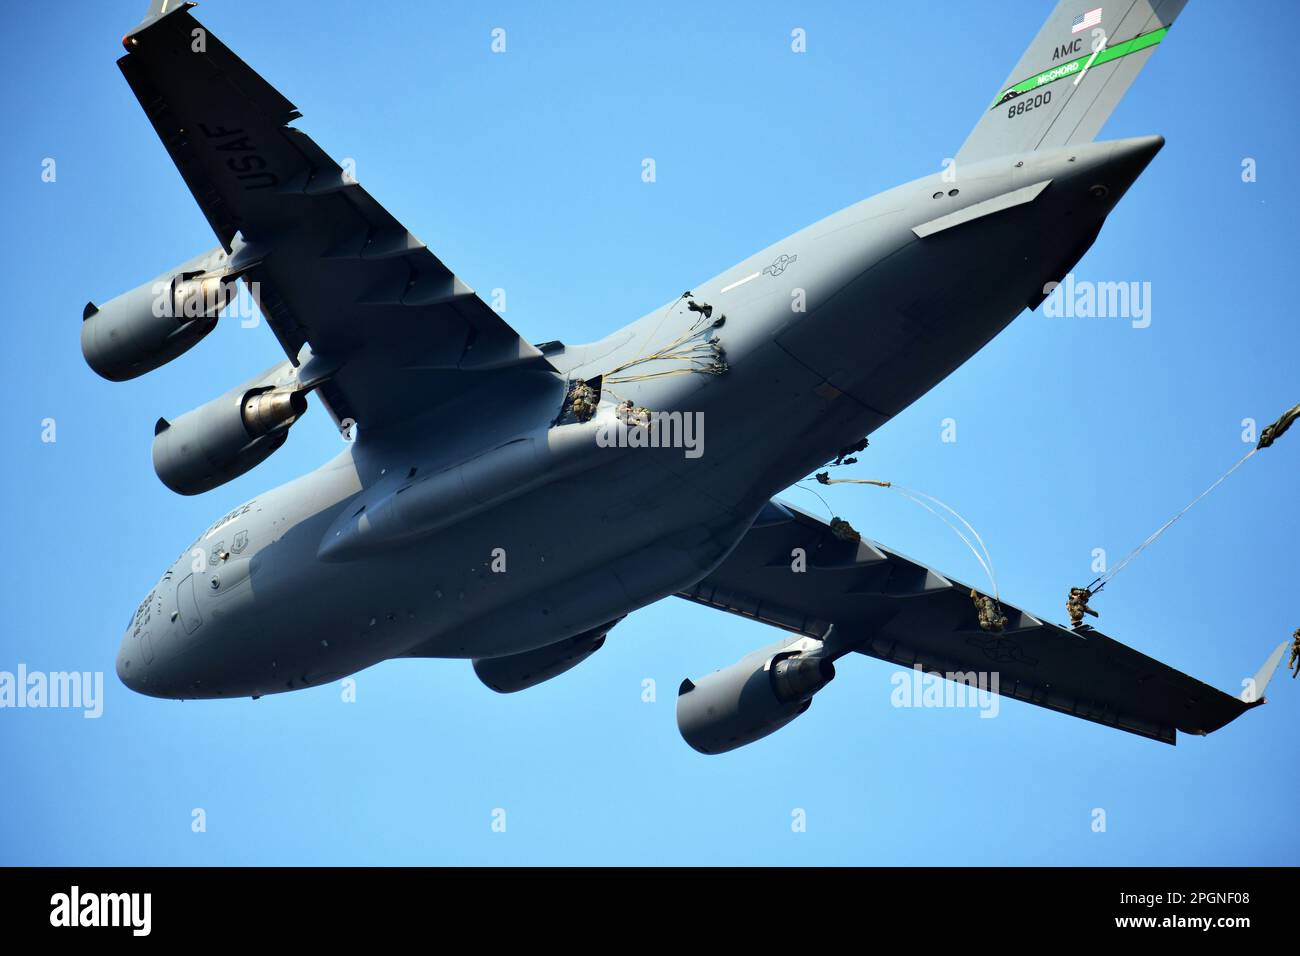 US Army Paratroopers assigned to 2nd Battalion, 503rd Parachute Infantry Regiment, 173rd Airborne Brigade, descend onto Juliet Drope Zone, after exiting a C-17 from 446th Airlift Wing, during an airborne operation in commemoration of the 20th anniversary of Operation Northern Delay, Pordenone, Italy on March 22, 2023. Operation Northern Delay occurred on 26 March 2003 as part of the 2003 invasion of Iraq. It involved dropping 1,000 paratroopers from the 173rd Airborne Brigade into Northern Iraq. It was the last large-scale combat parachute operation conducted by the U.S. military since Operati Stock Photo